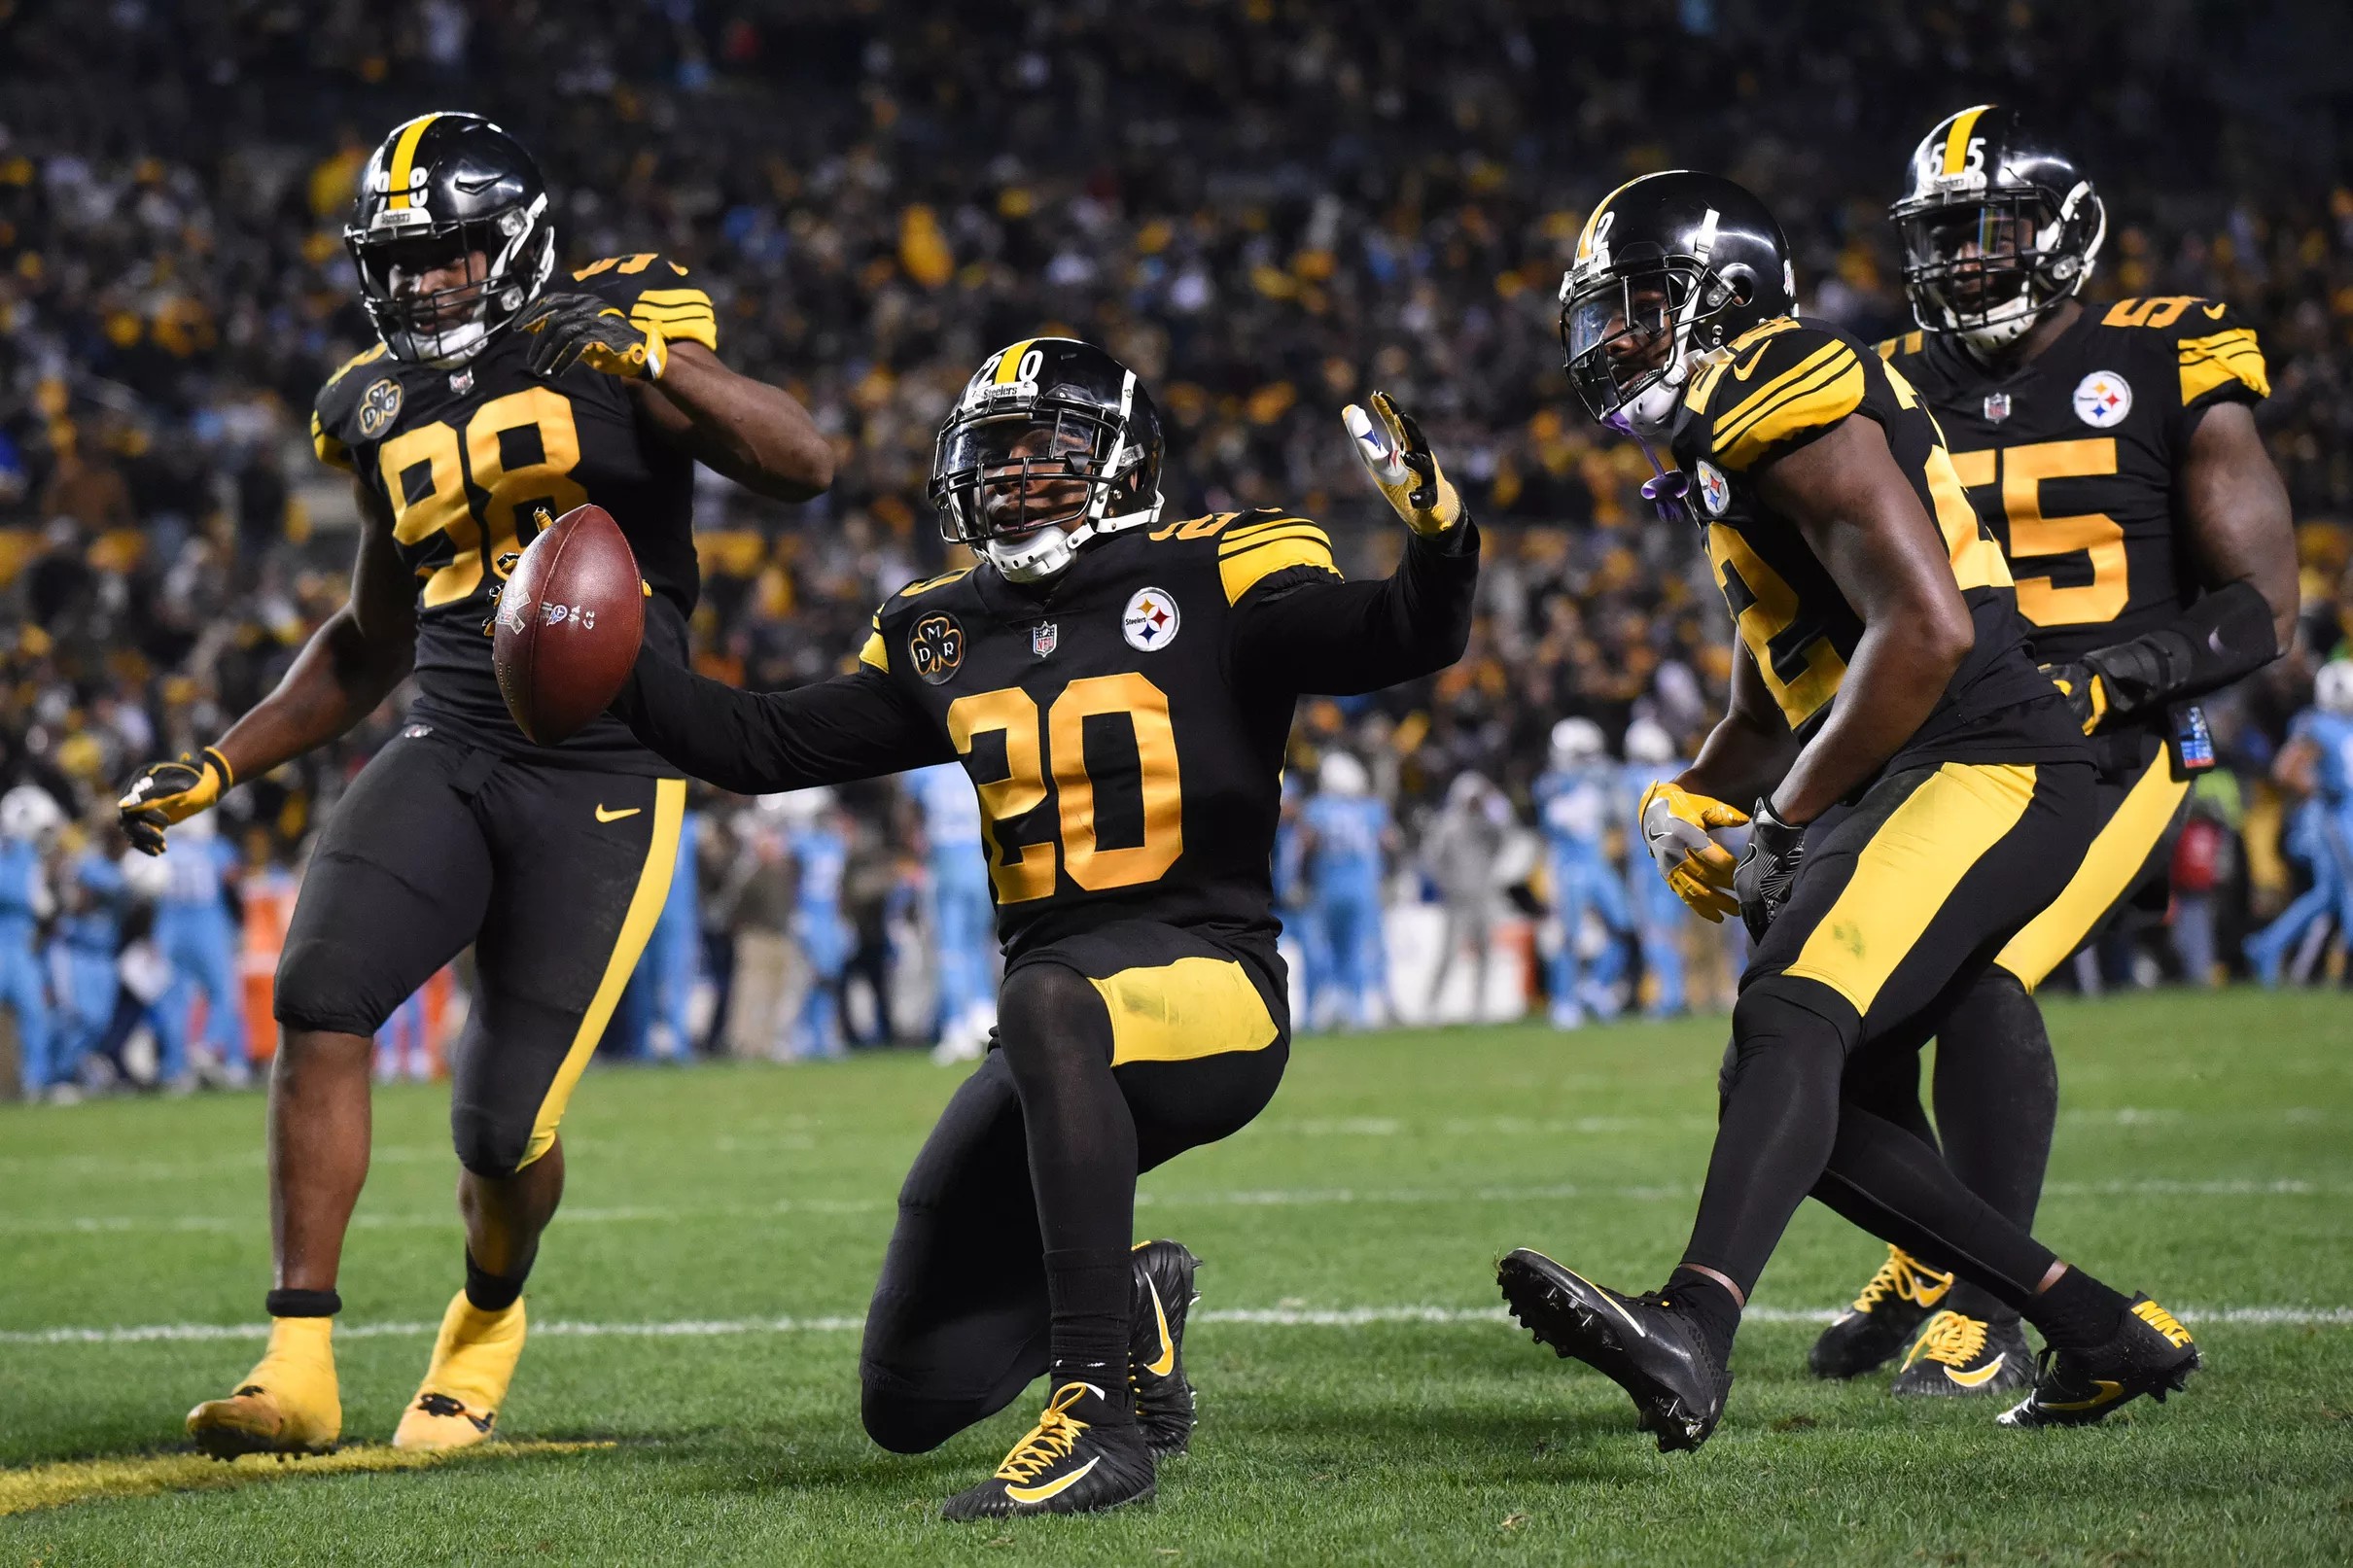 Steelers will wear their ‘Color Rush’ uniforms in Week 10 on Thursday